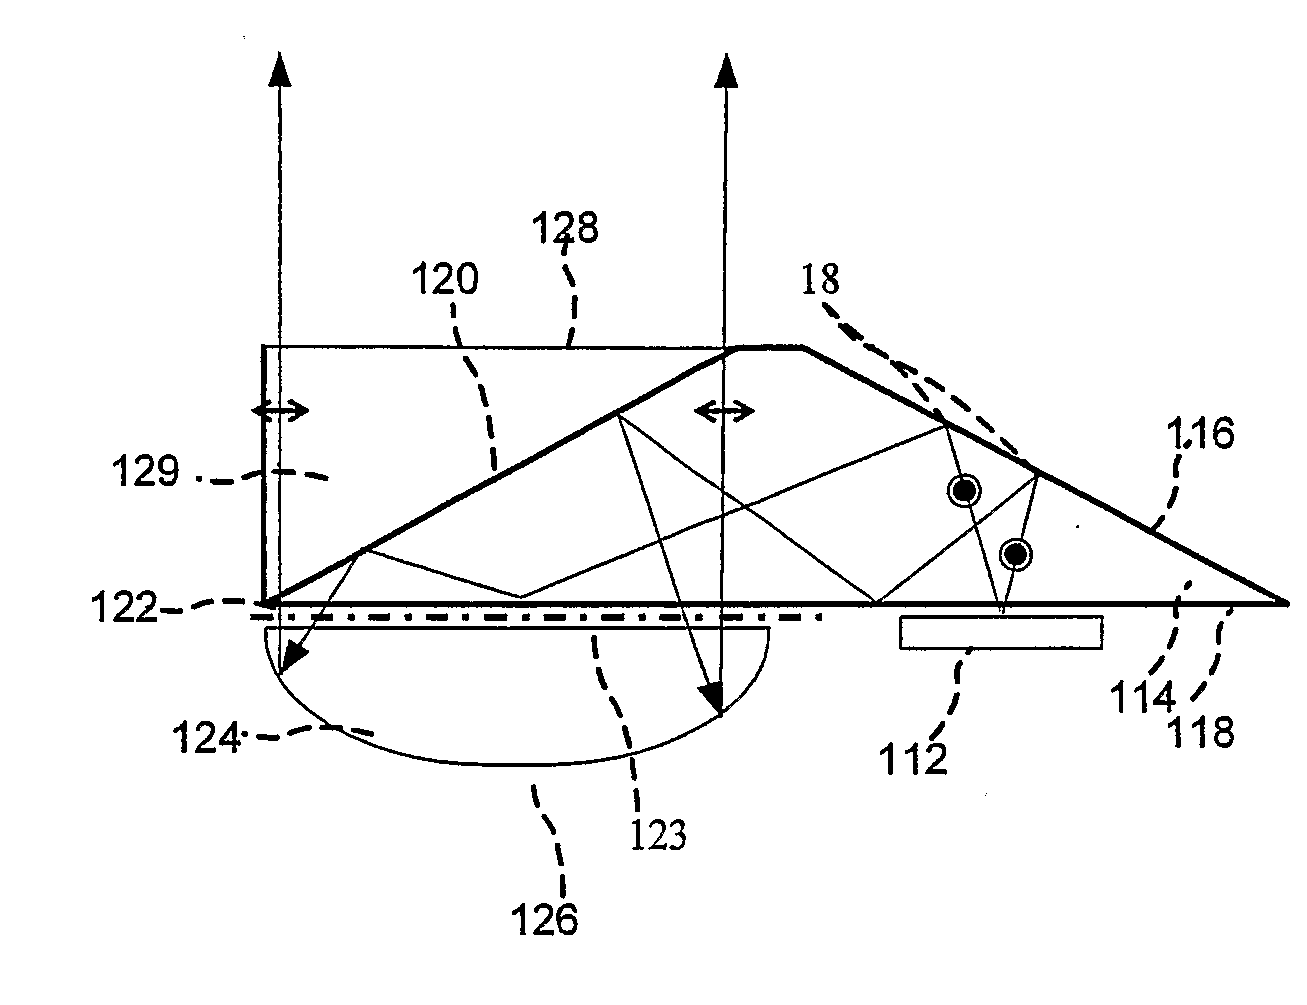 Substrate-guided imaging lens